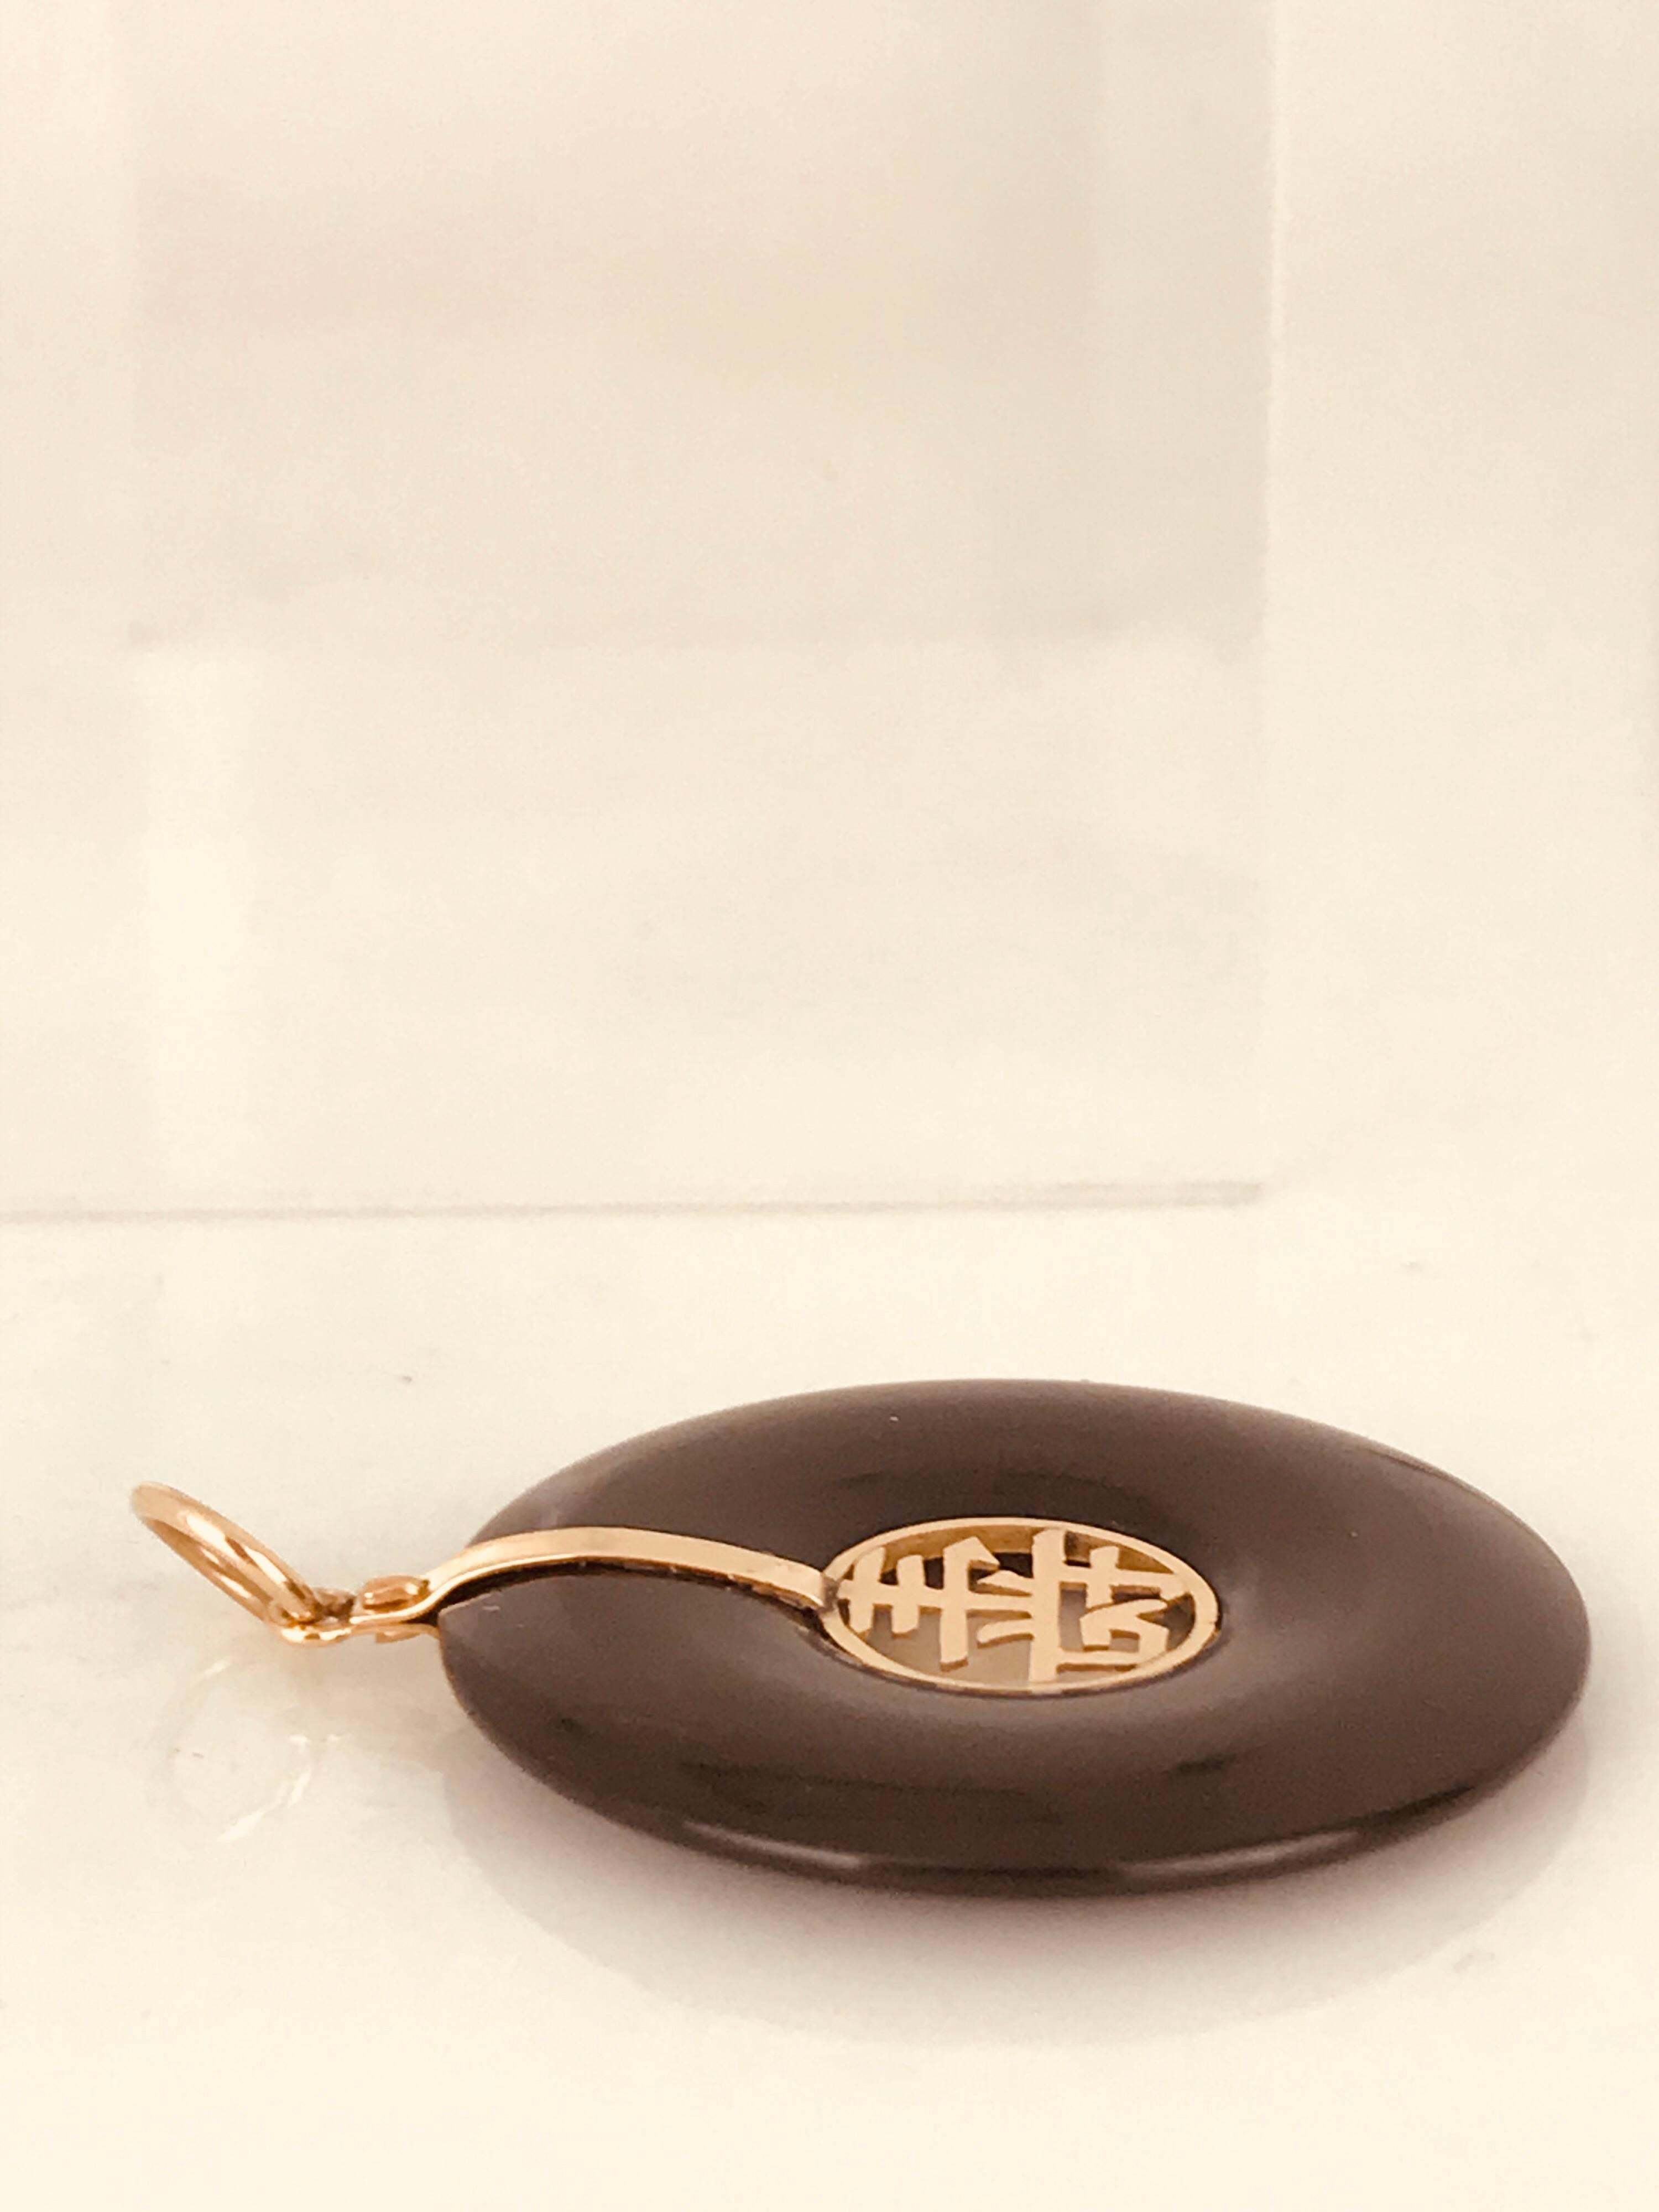 14 karat yellow gold, Chinese good-luck pendant with hallmark HK and 14 Kt. 
The Black onyx is concave measuring 1.24 inches in diameter. The gold insert measures .42 inches.
Circa 1965, this retro pendant has a beautiful luster. 

GIA Gemologist,